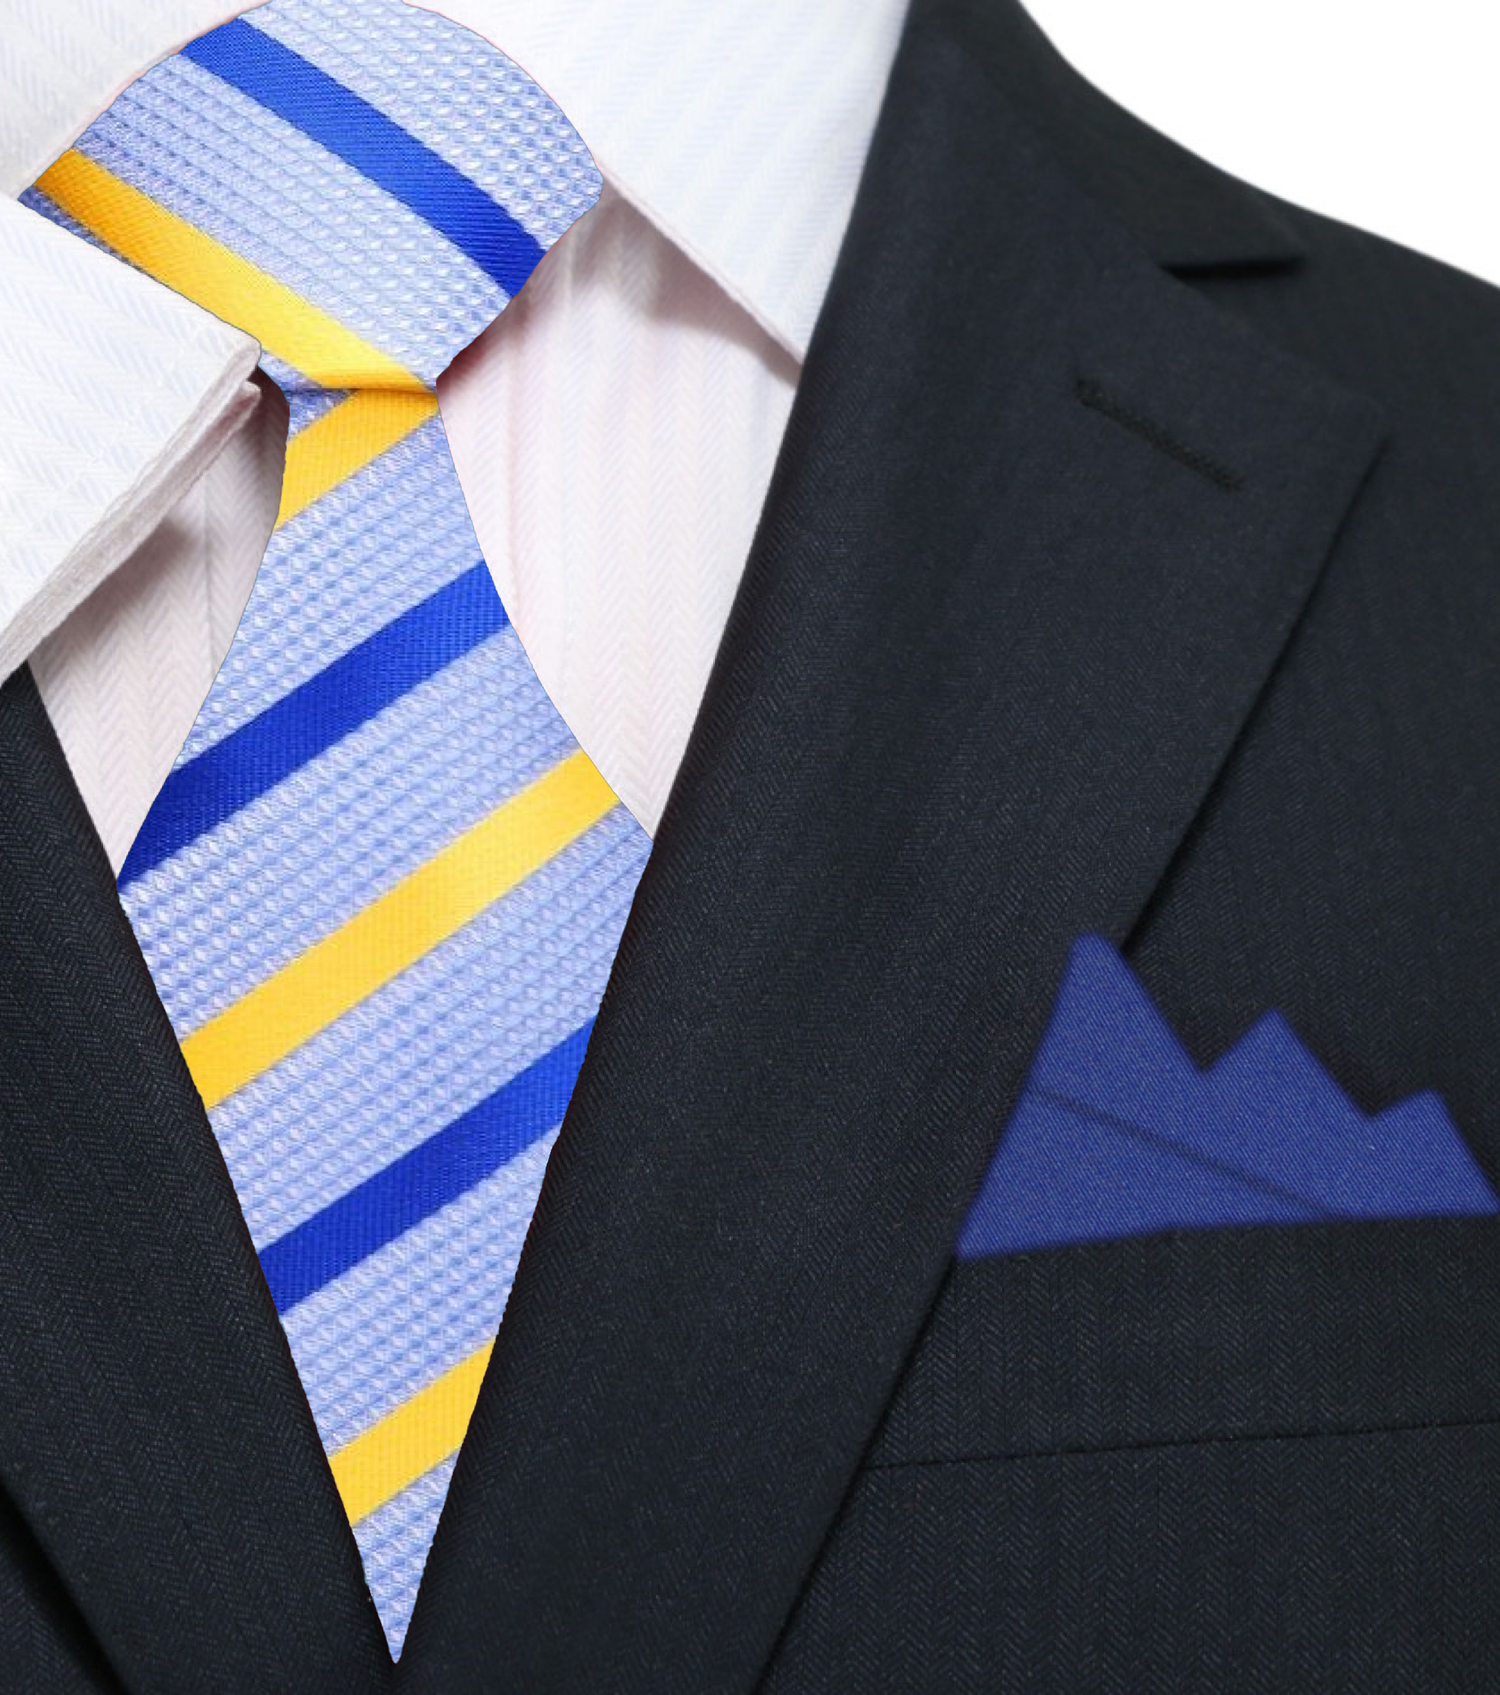 Main: Light Blue, Blue, Yellow Stripe Tie and Blue Square